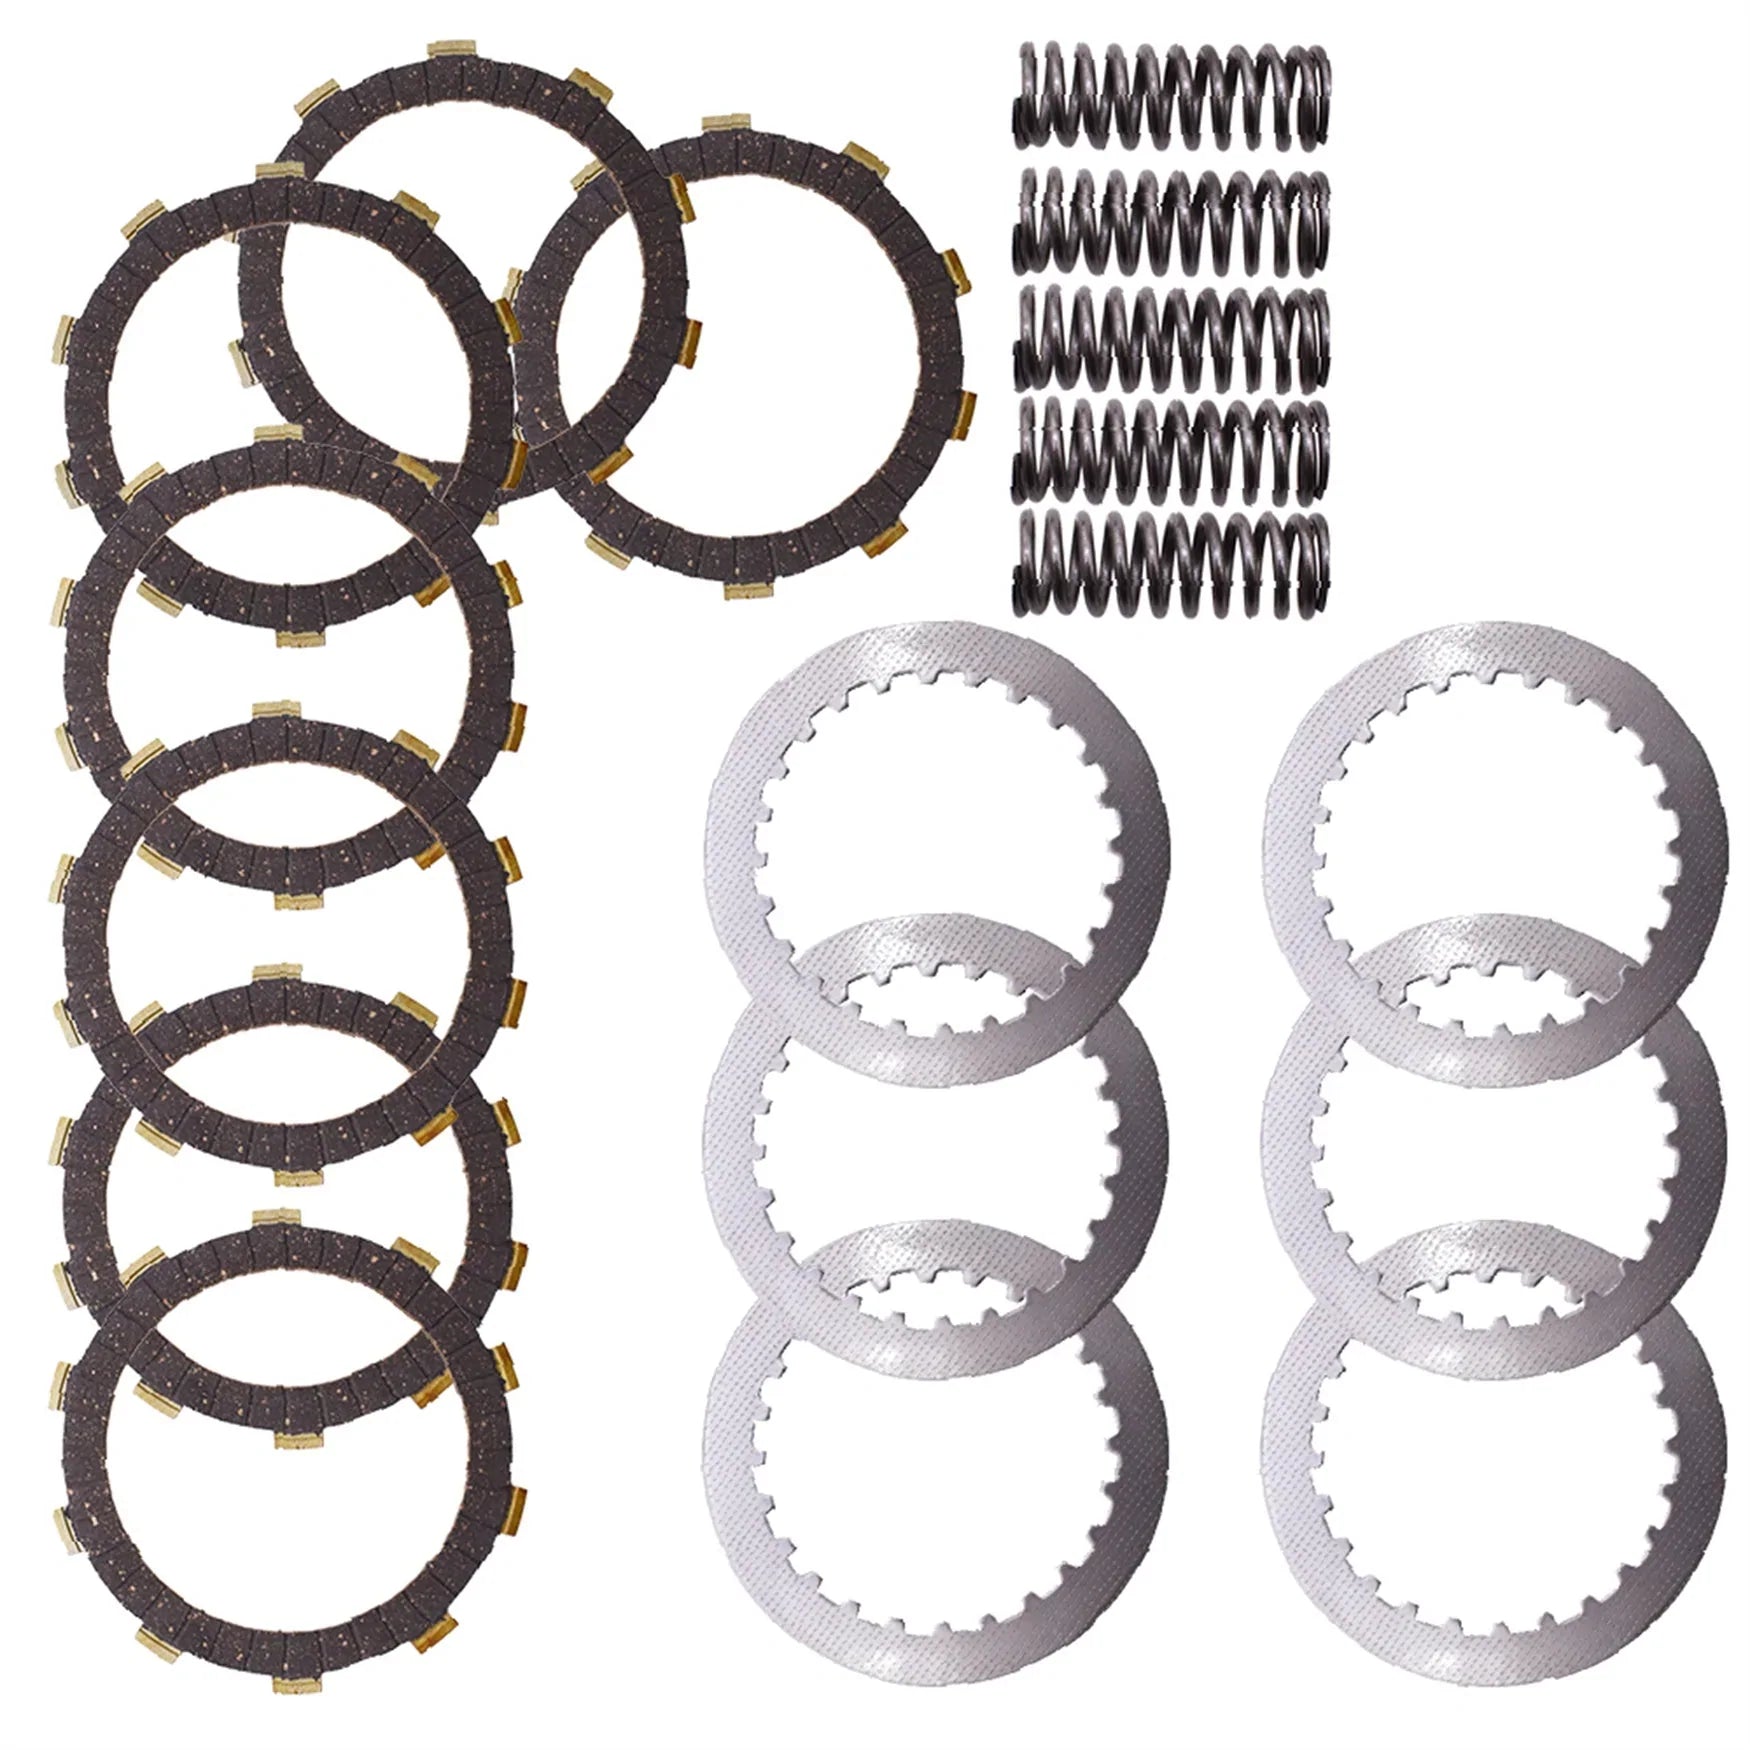 Heavy Duty Clutch Kit with Springs Replacement for Honda TRX400EX TRX 400EX 400X 1999-2014 LAB WORK MOTO